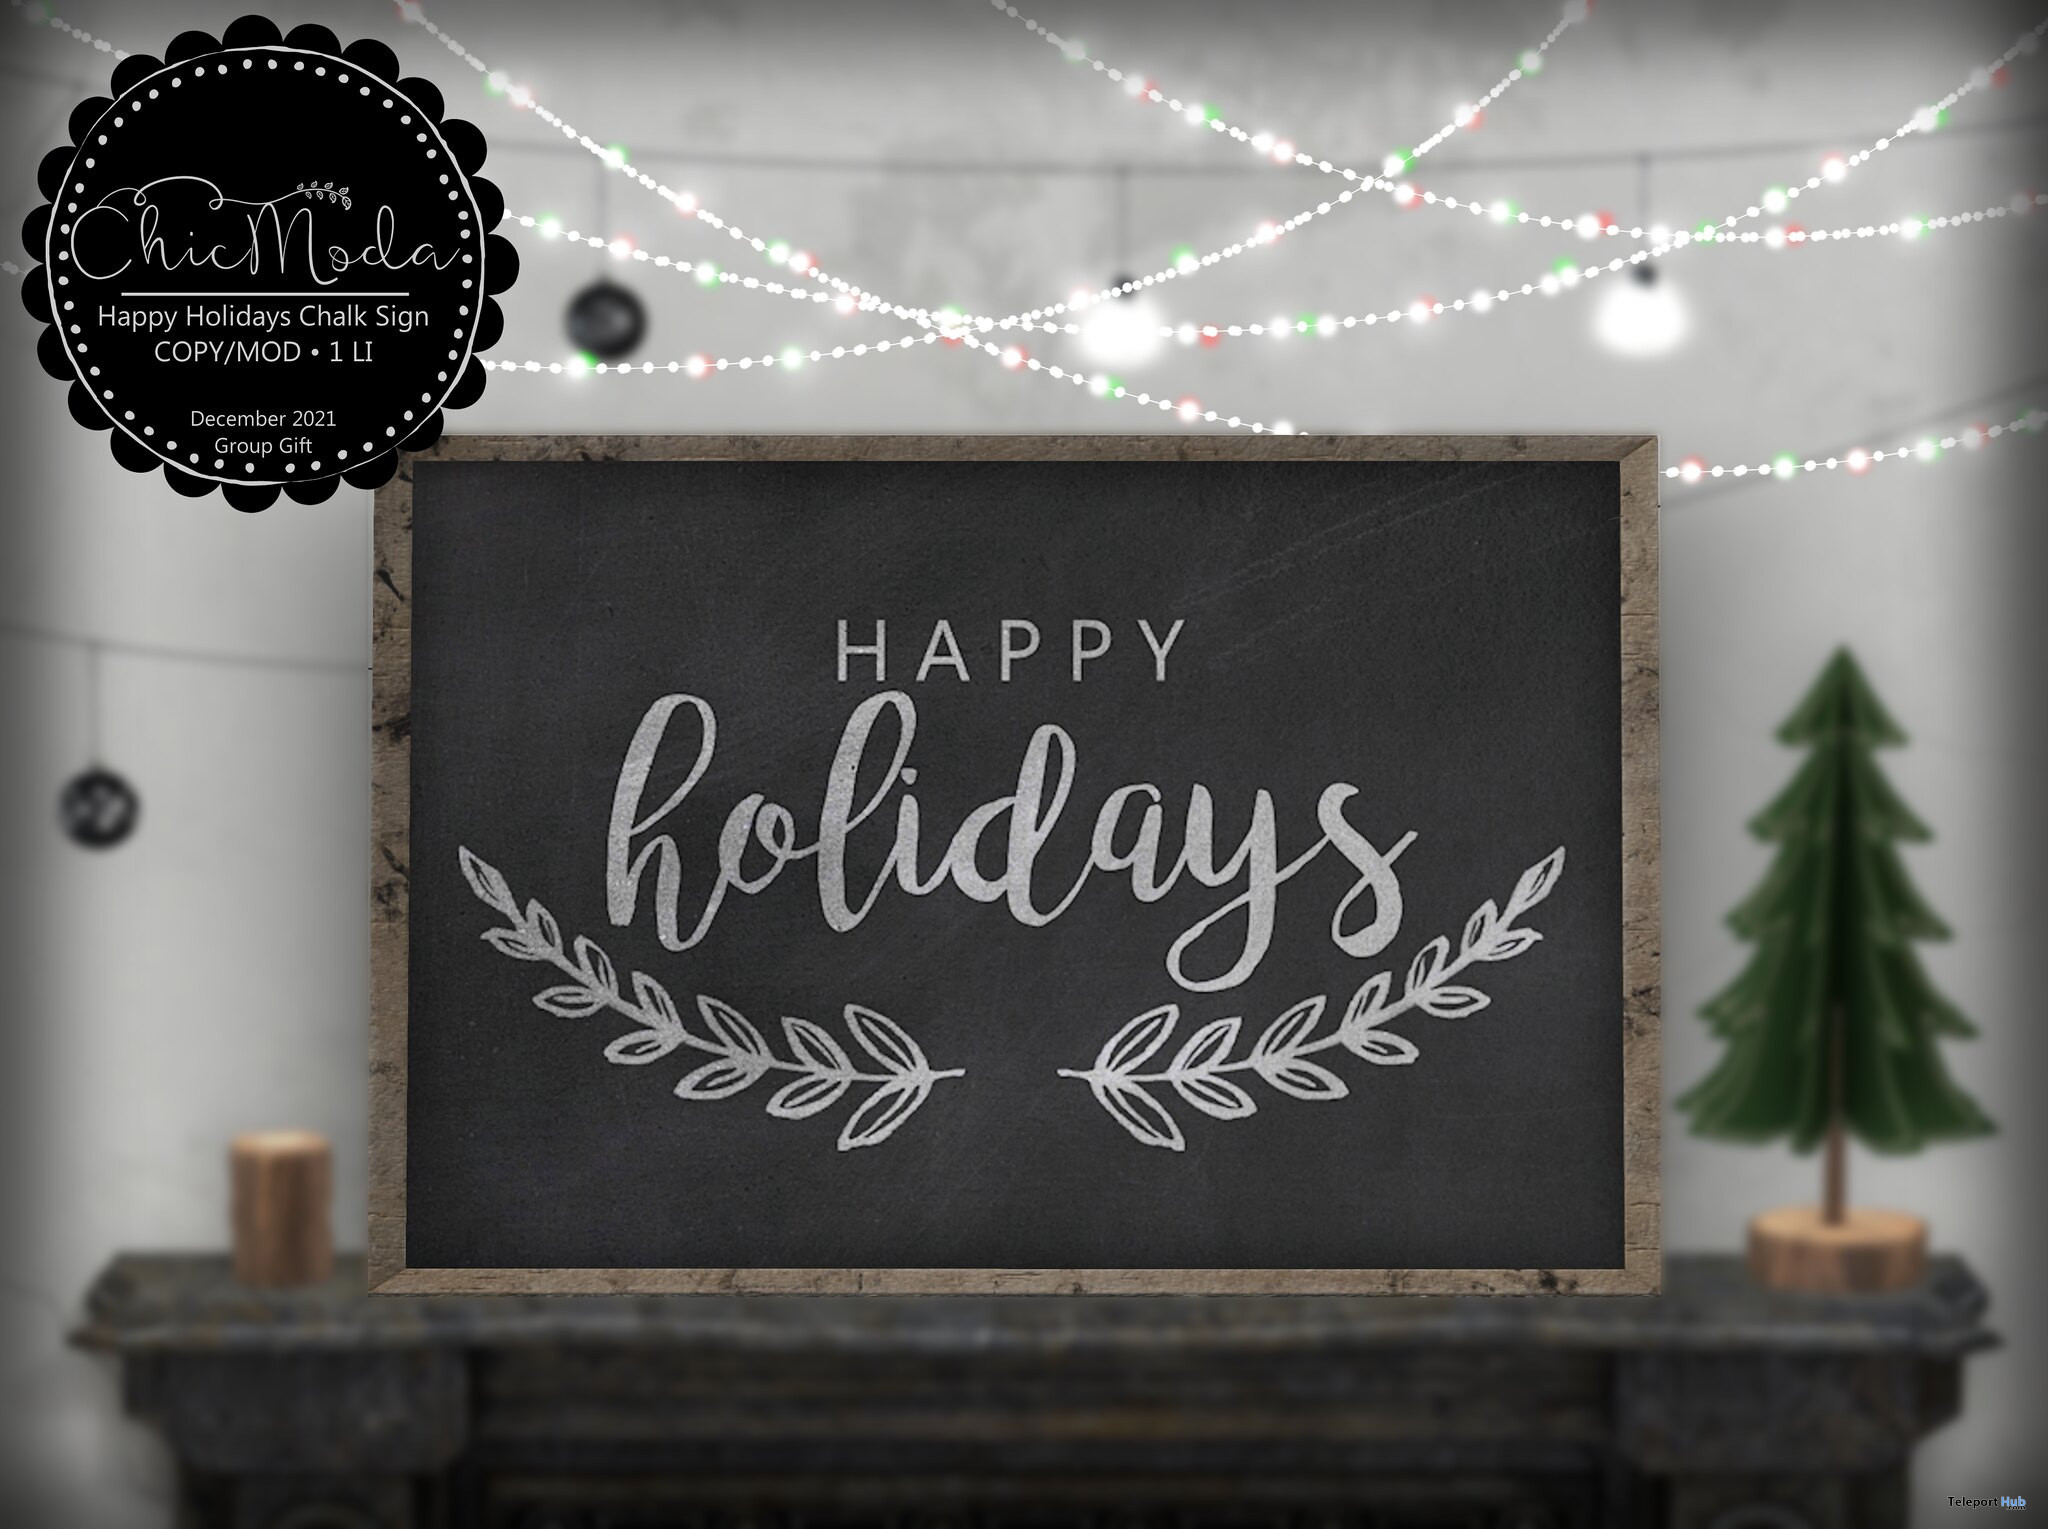 Happy Holiday's Chalkboard Sign December 2021 Group Gift by ChicModa - Teleport Hub - teleporthub.com